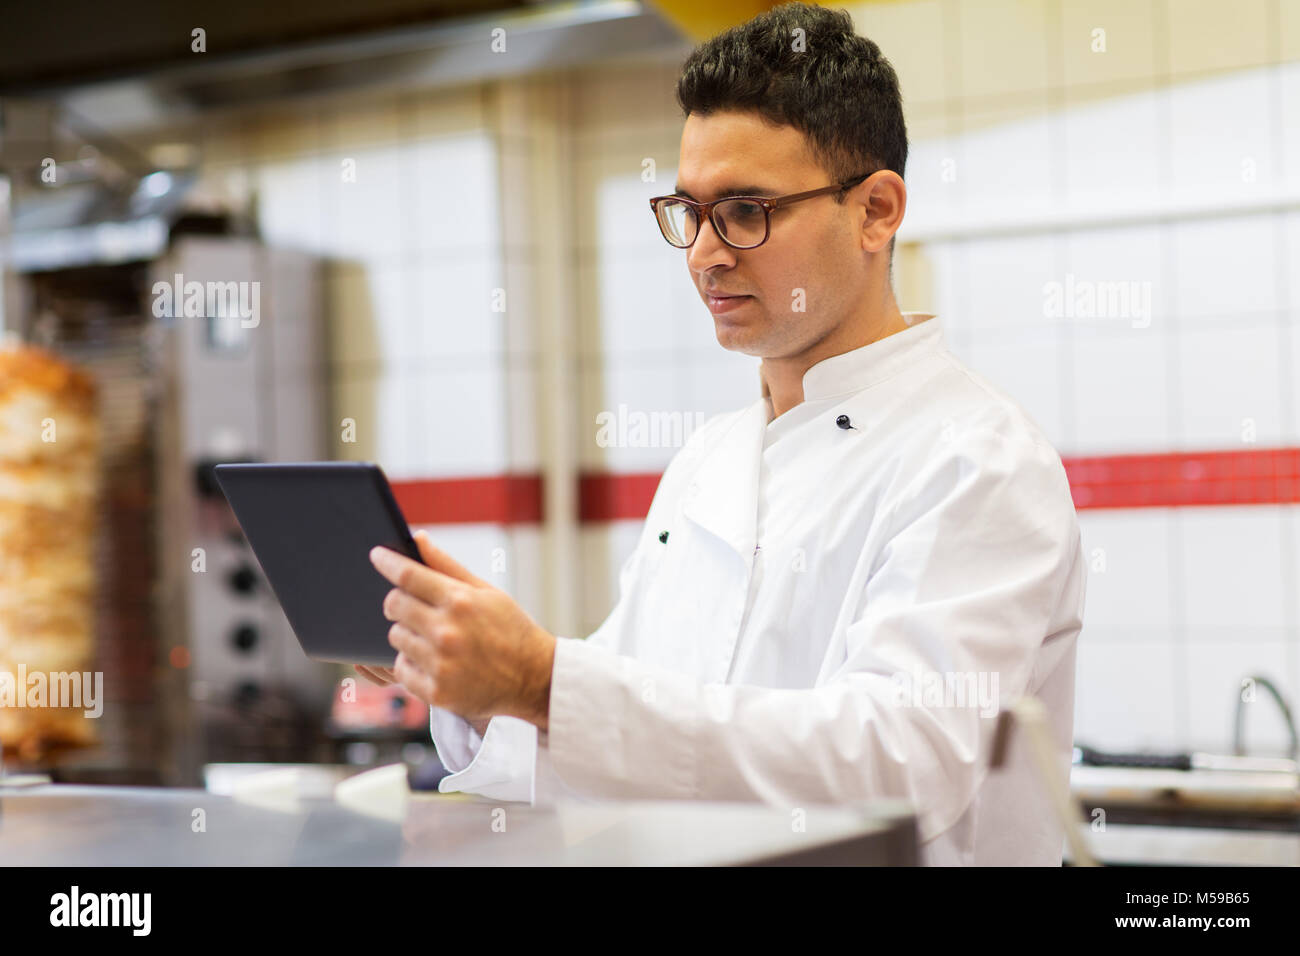 chef cook with tablet pc at restaurant kitchen Stock Photo